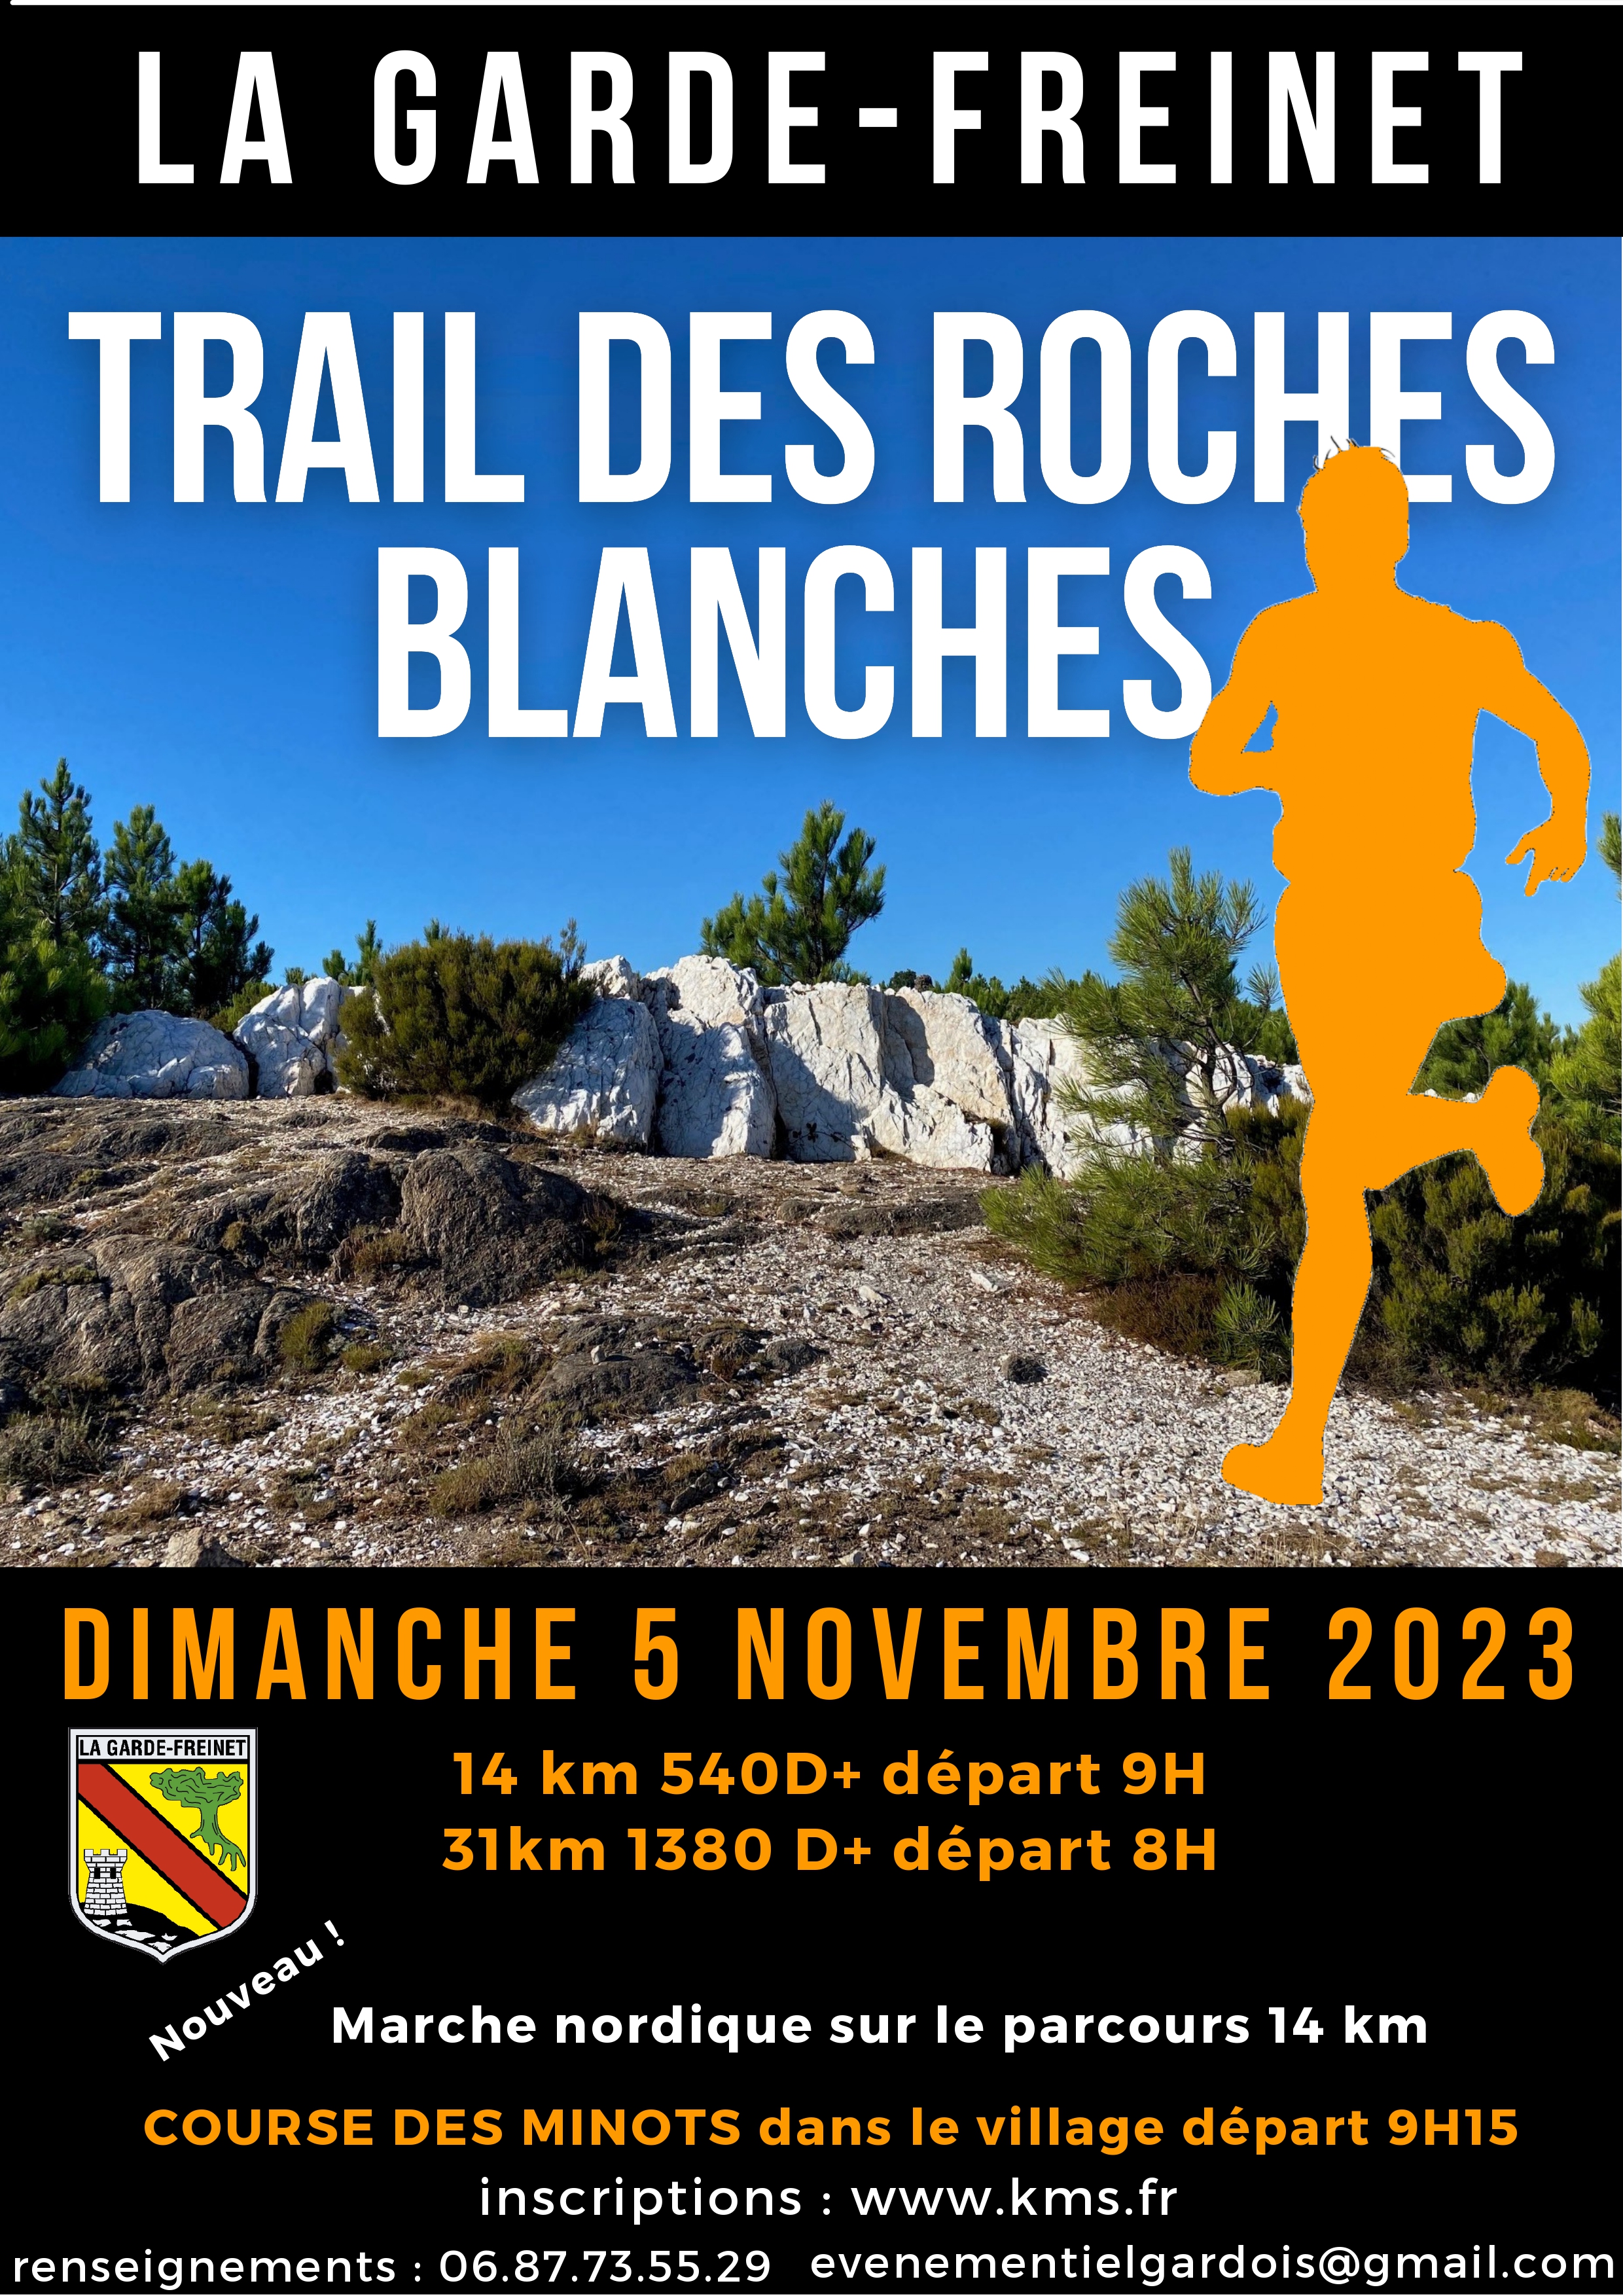 TRAIL DES ROCHES BLANCHES